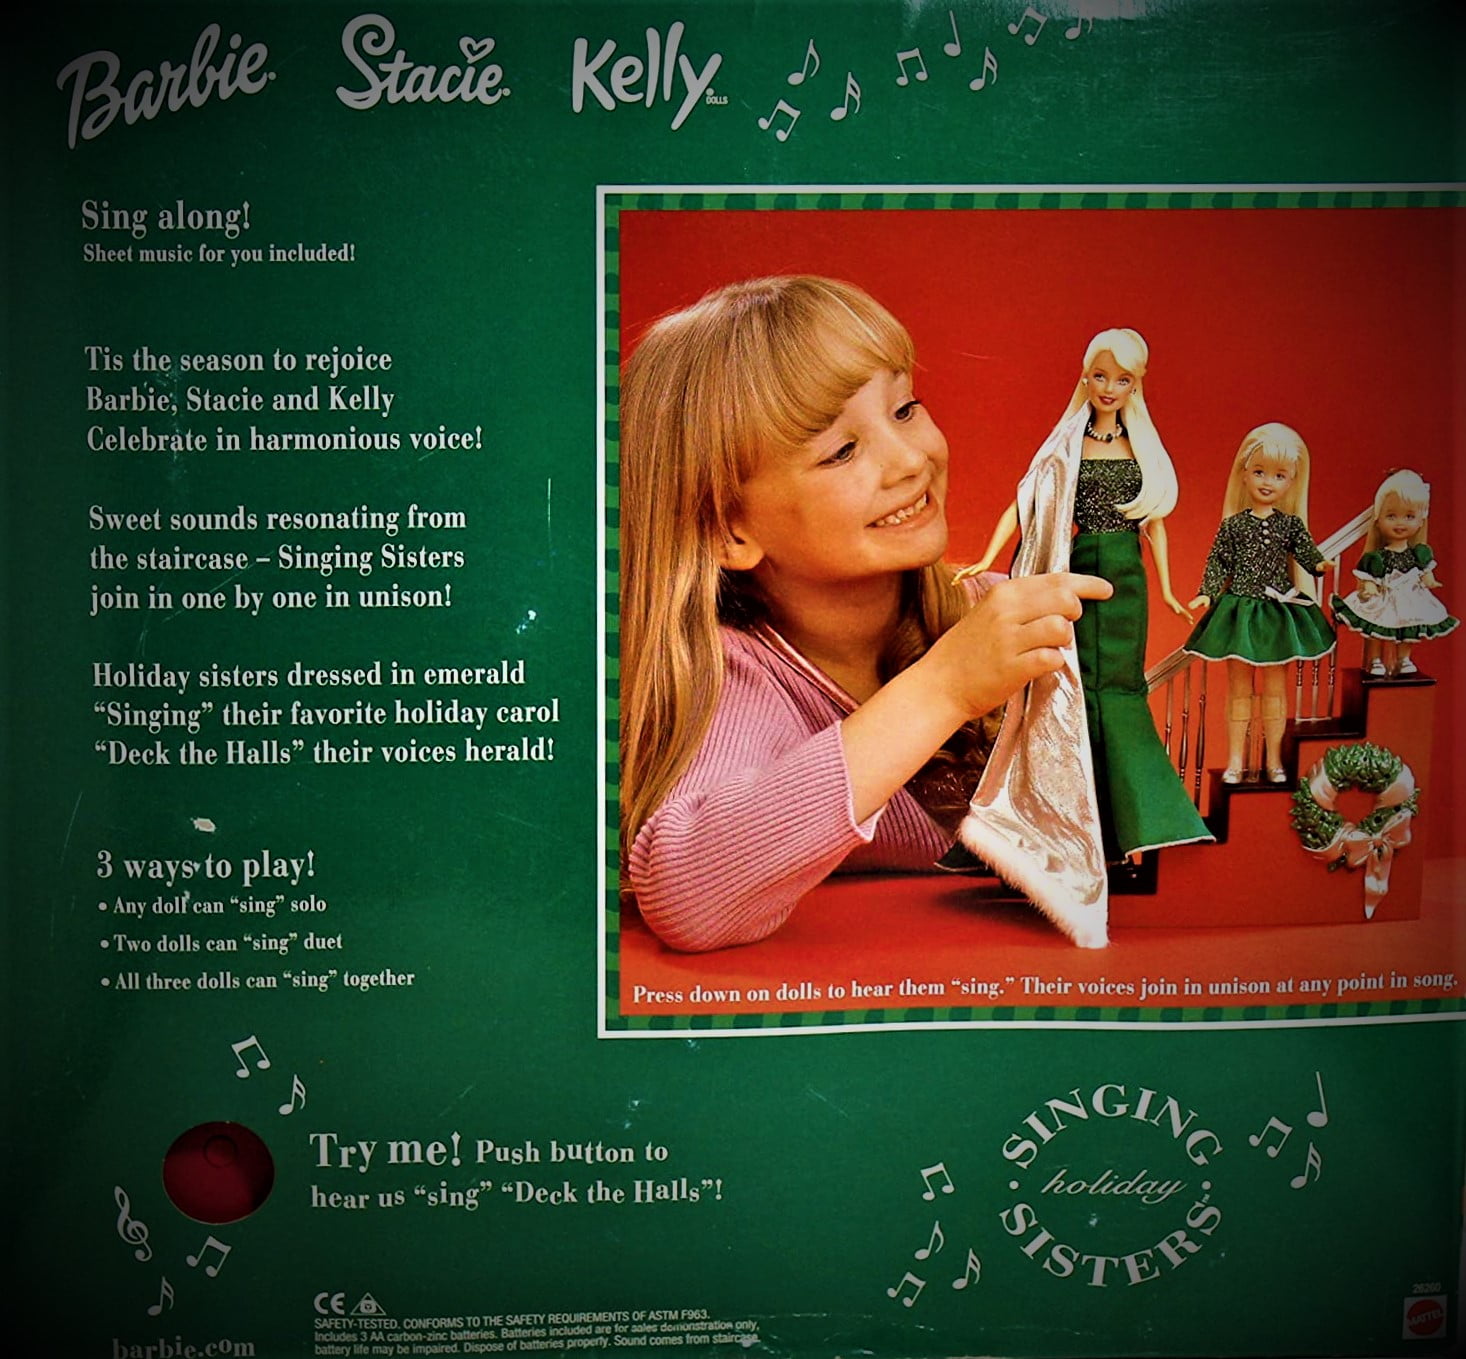 Barbie Holiday Singing Sisters Stacie Kelly Dolls Sing Deck The